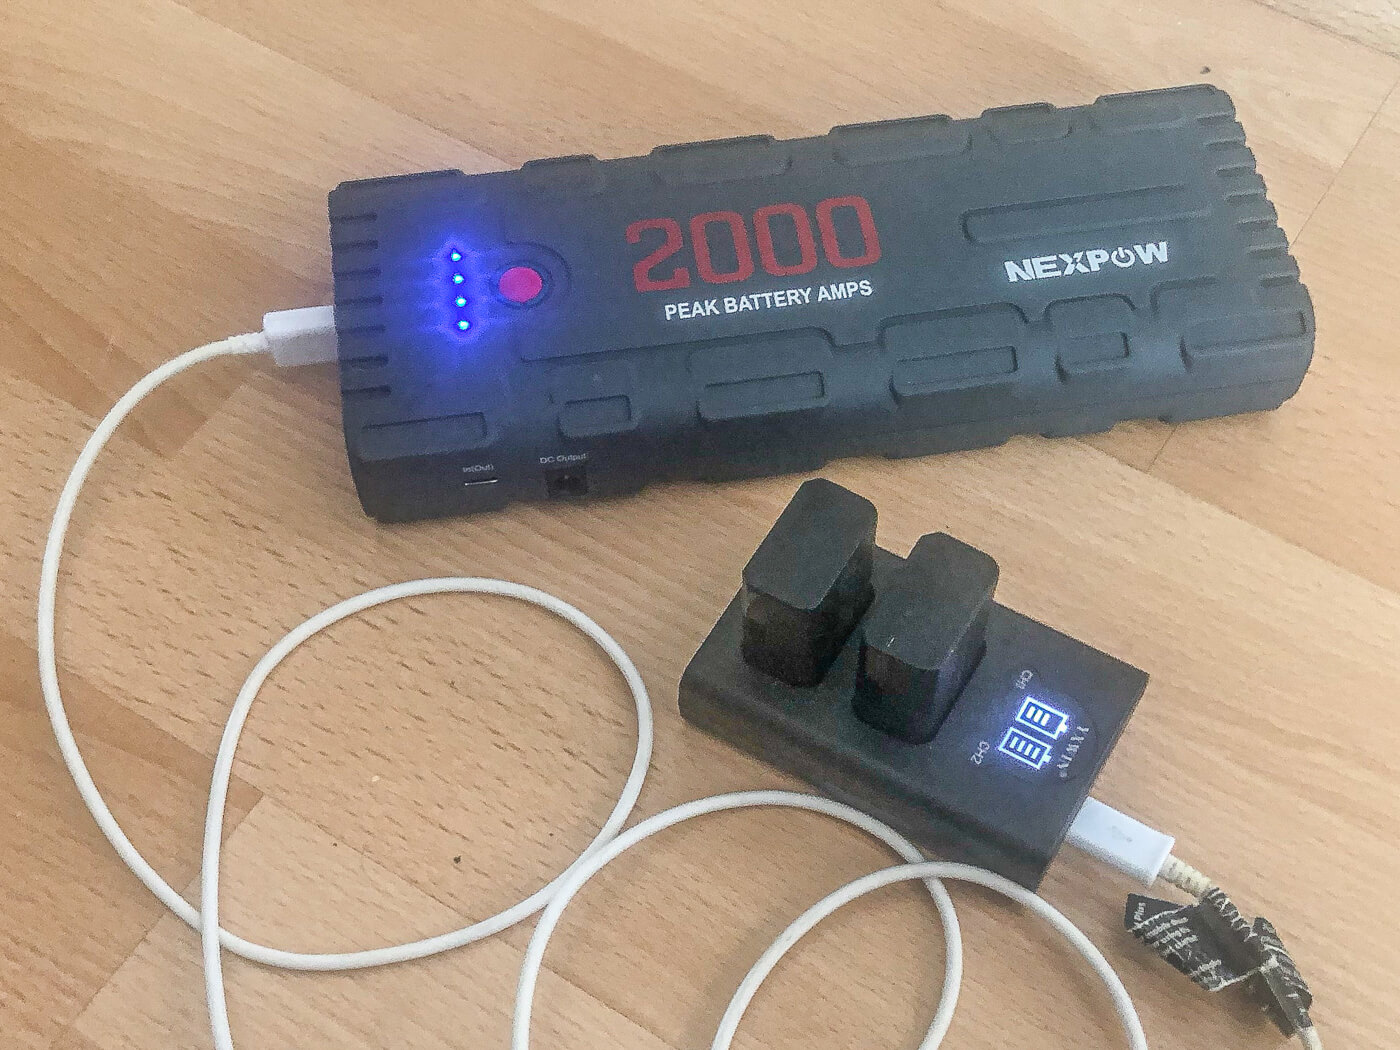 NP-FW50 battery charger and power bank